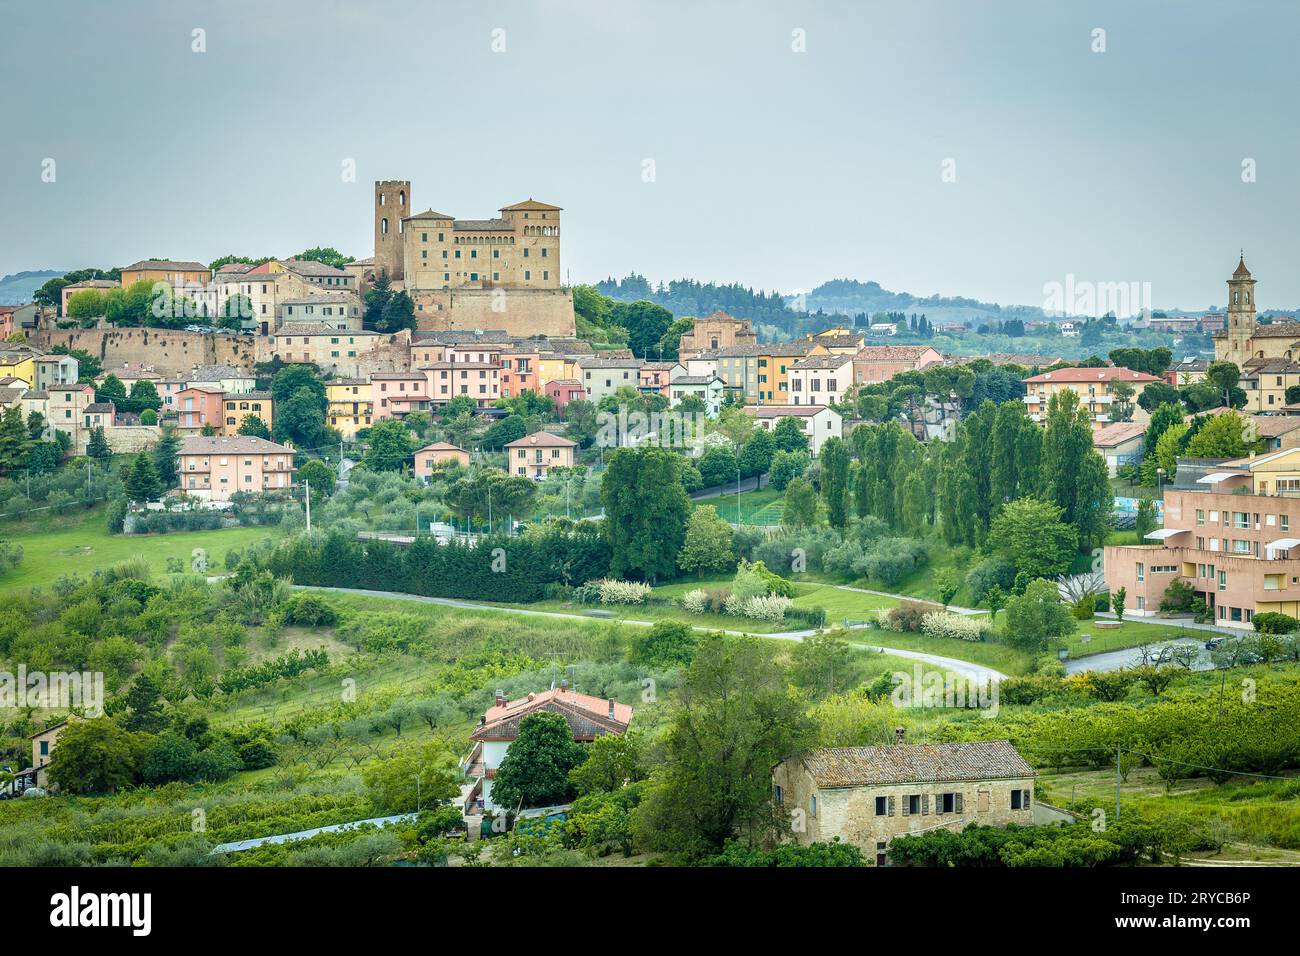 Medieval castle in the rolling hills Stock Photo